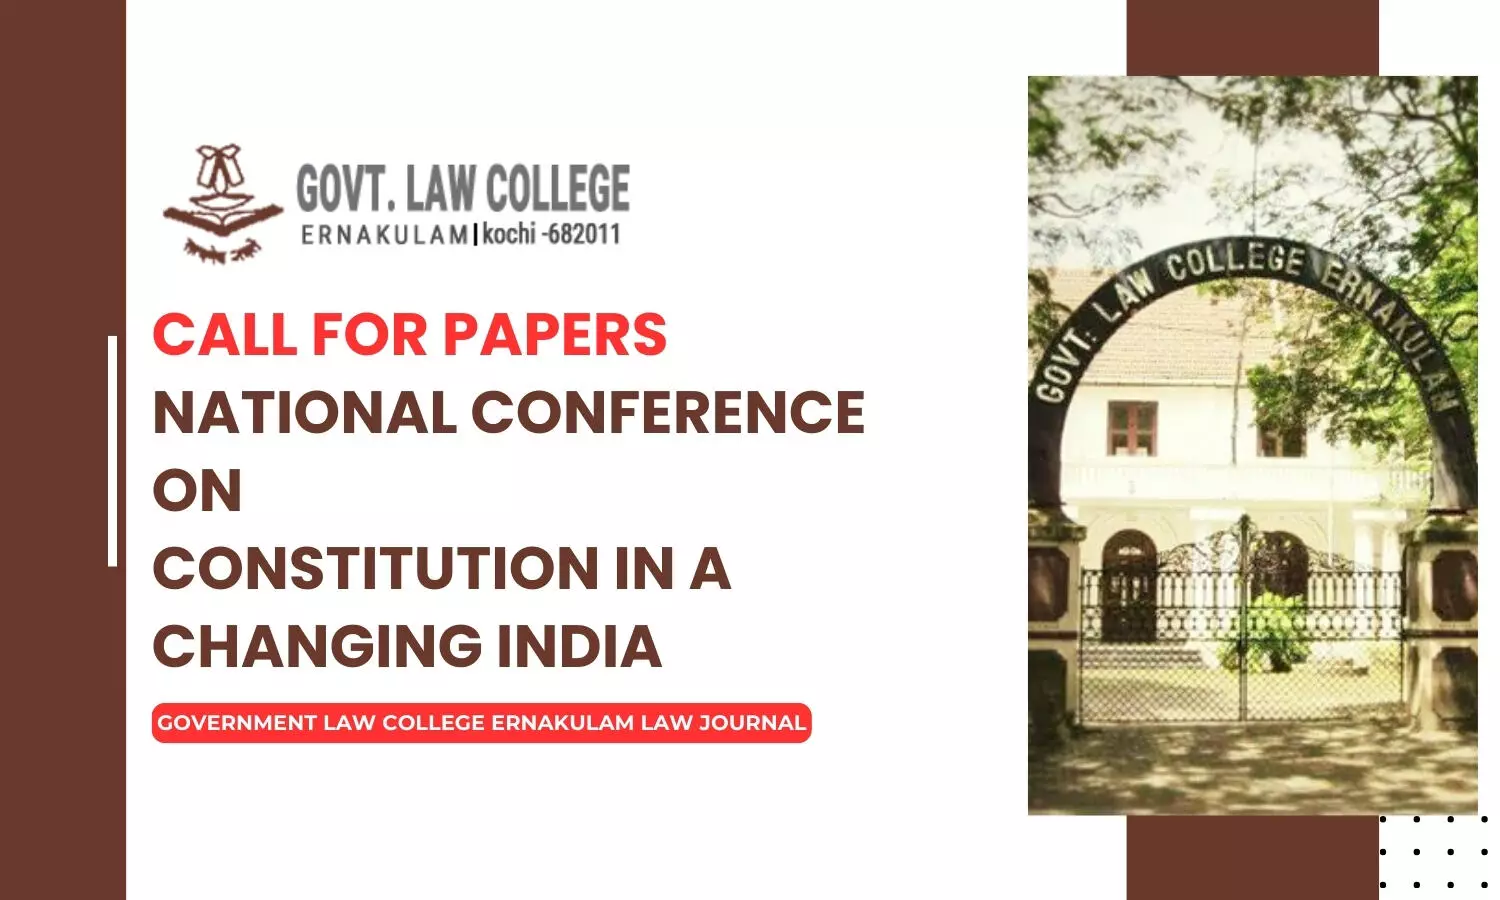 Call for Papers National Conference on Constitution in a Changing India  GLC Ernakulam